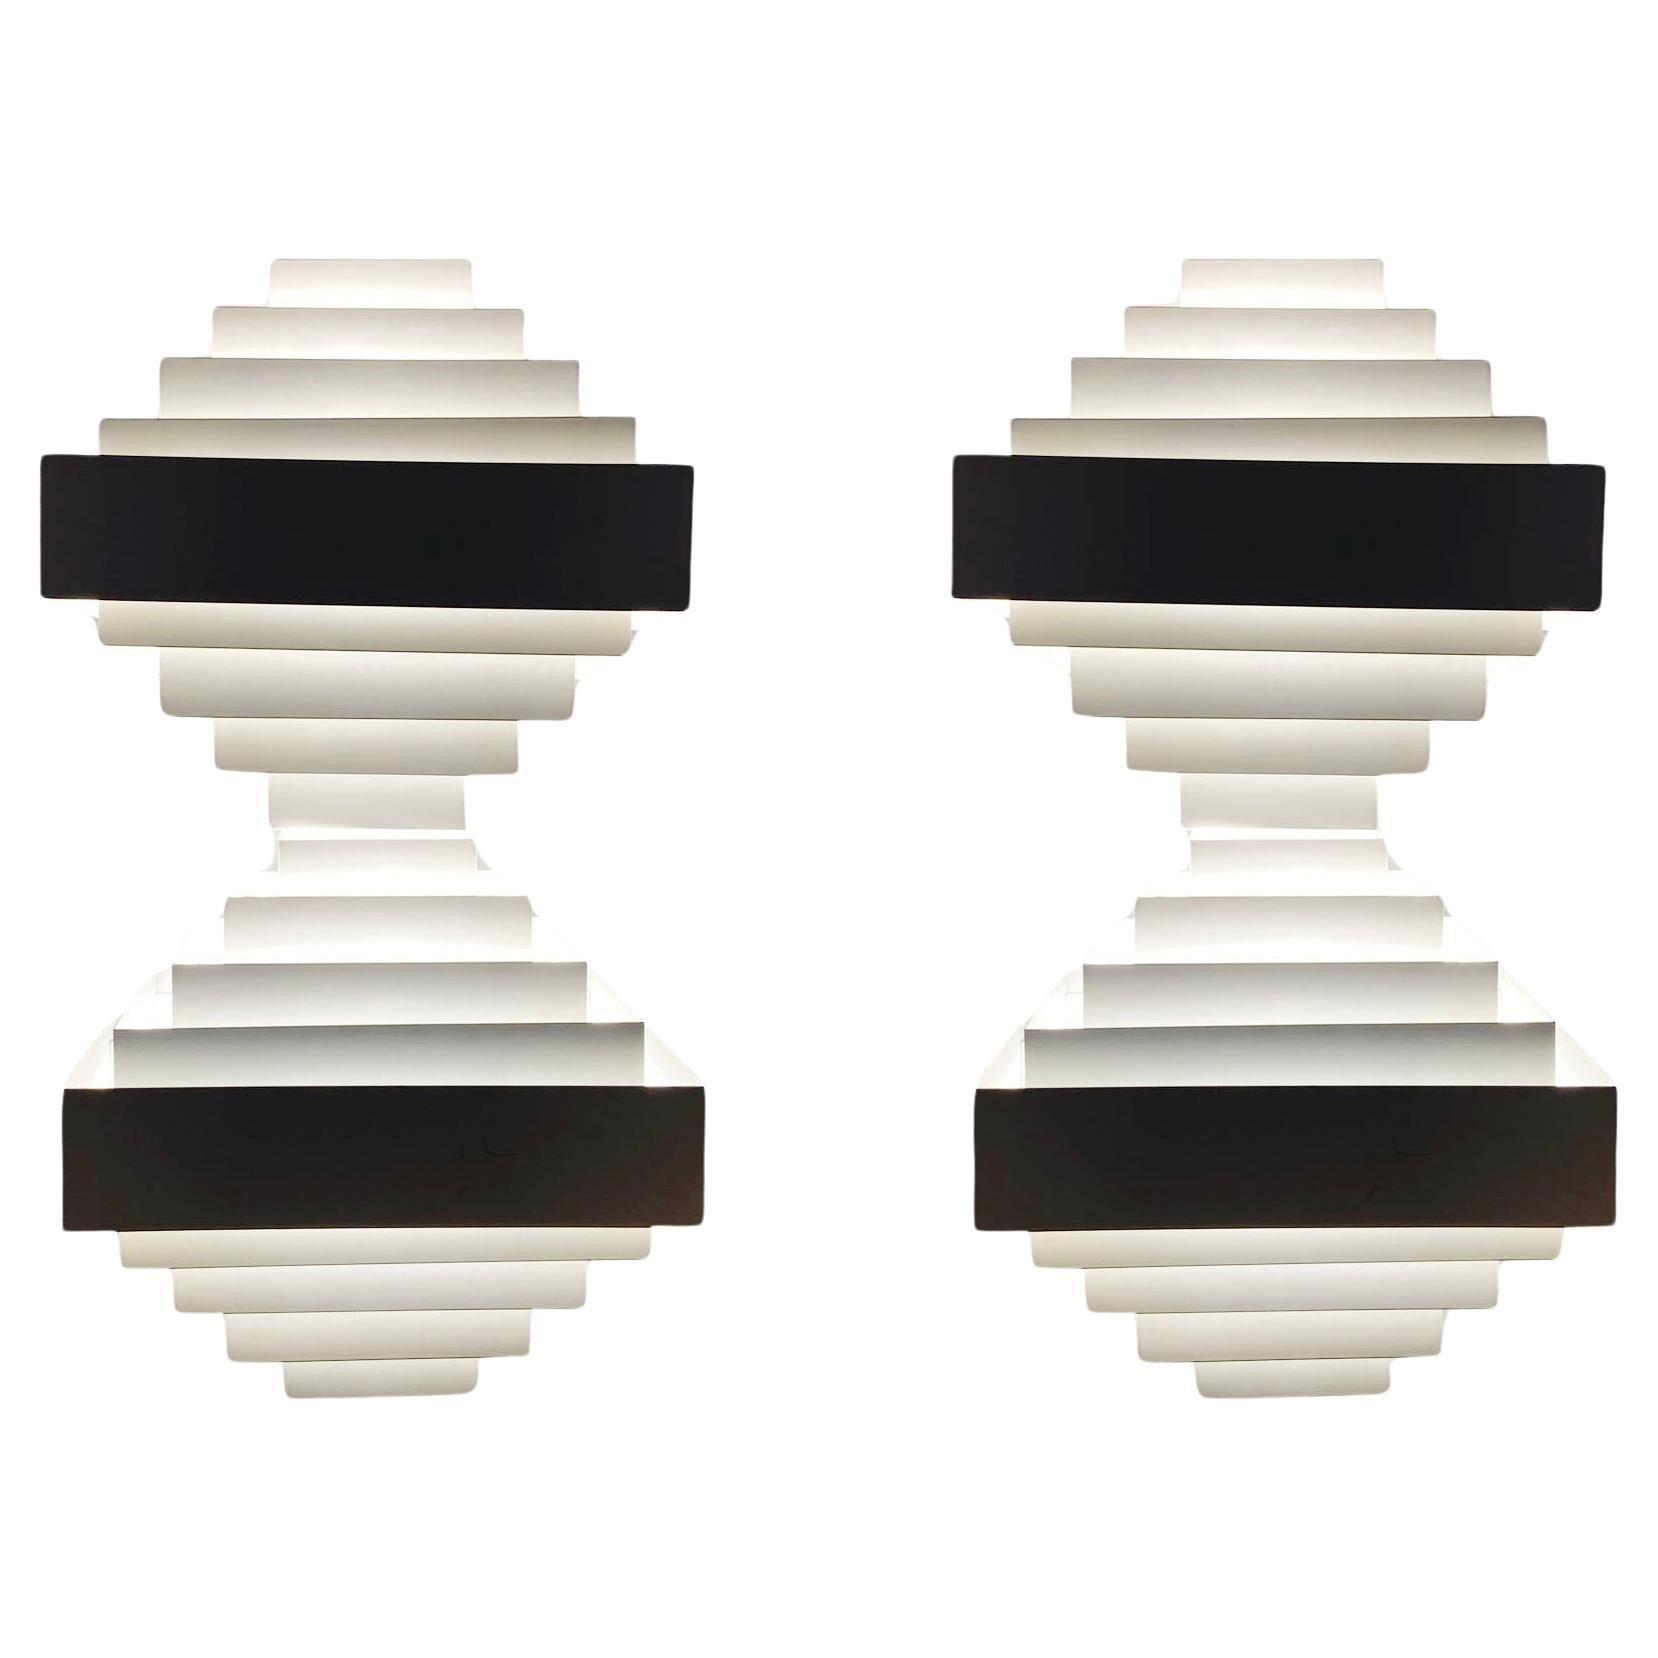 Geometric pair of White Metal Wall Light by Spectral, Freiburg, Germany, 1980's. Both lamps are build up by a double diamond shape formed by horizontal bands of white enamelled metal which allows the light to be dispersed into segments that radiate.